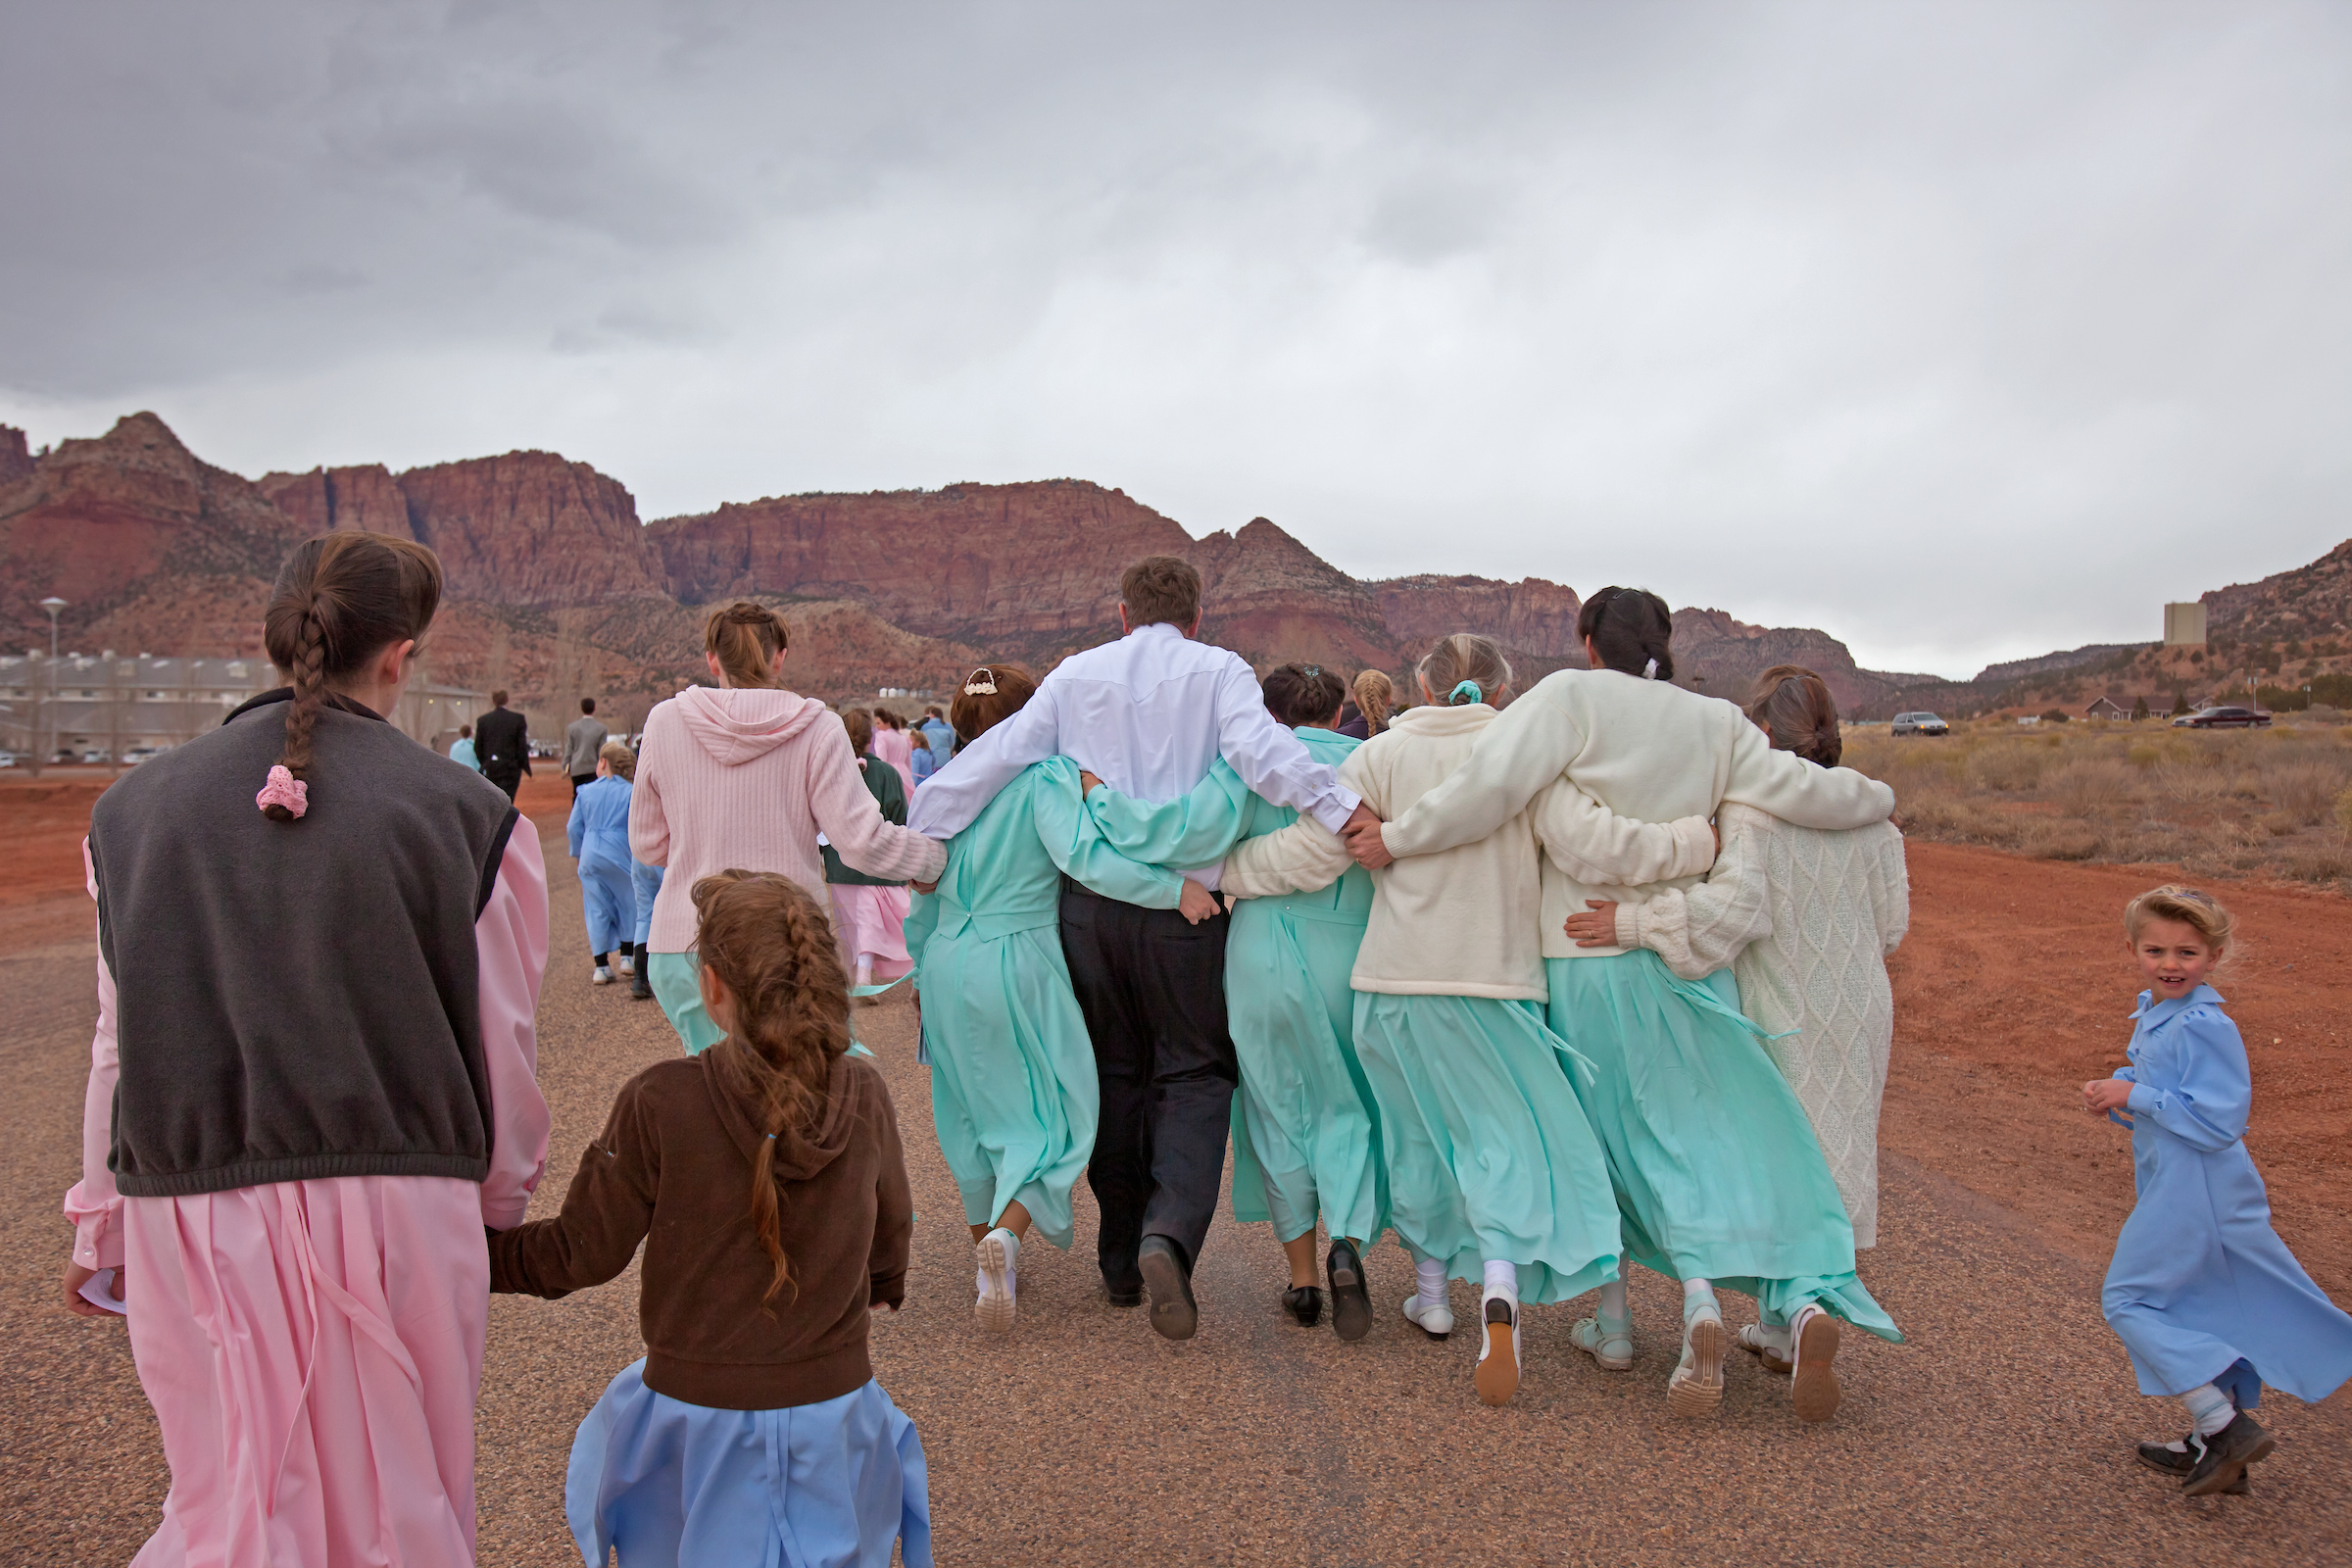 An FLDS man leaves the funeral service linking arms with six of his wives.